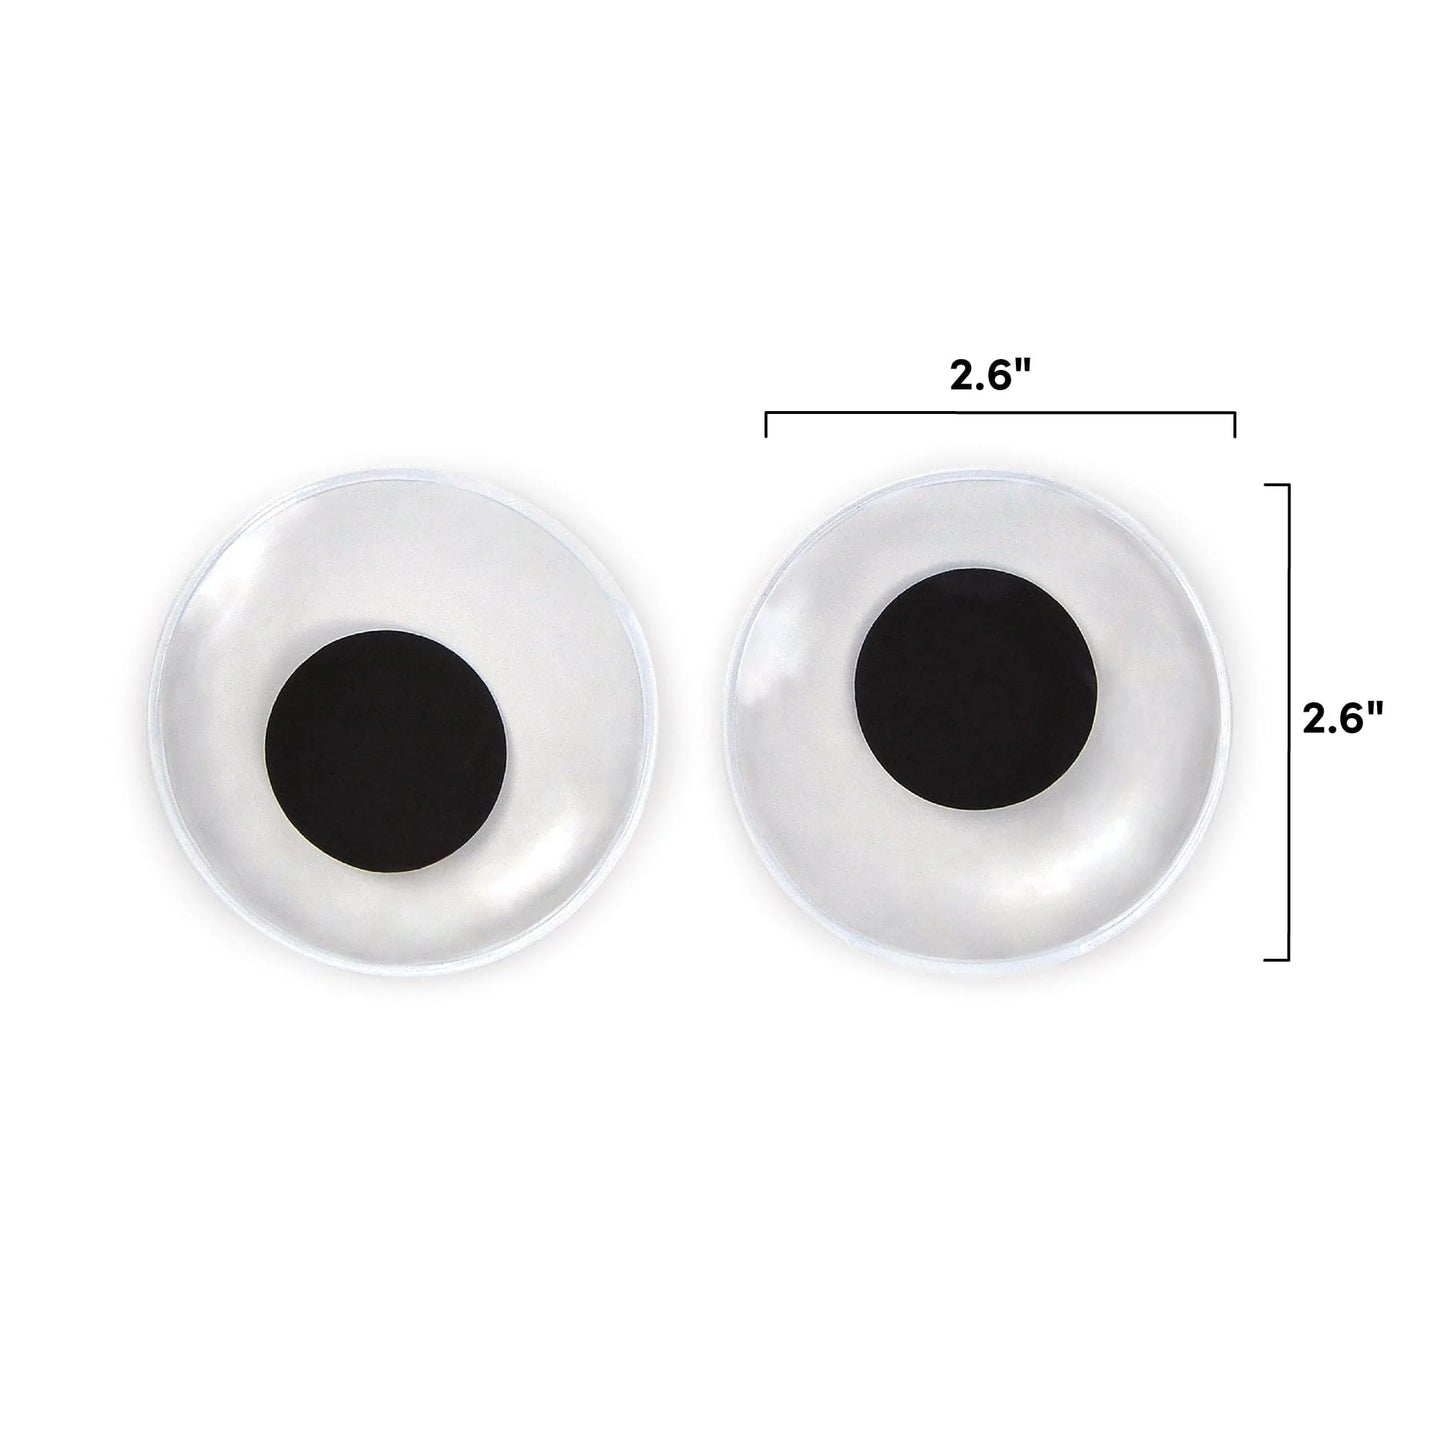 Chill Out Googly Eyes Gel Eye Pads